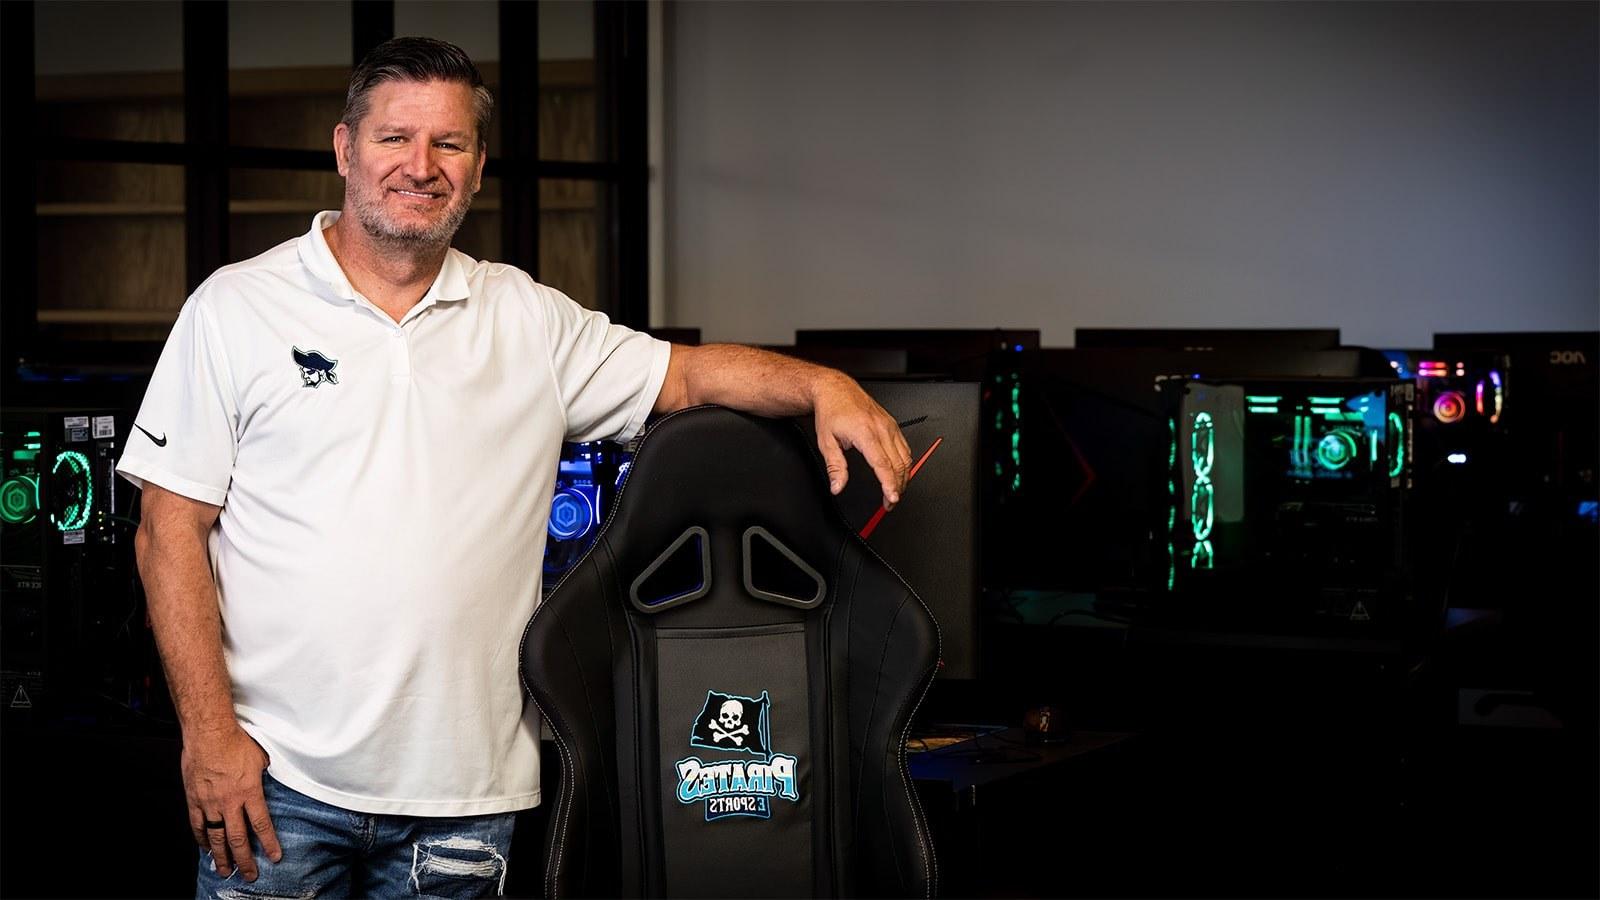 Scott Brumfield stands in front of gaming PCs. He is next to a PSC Pirates gaming chair and is wearing a Pirates shirt.